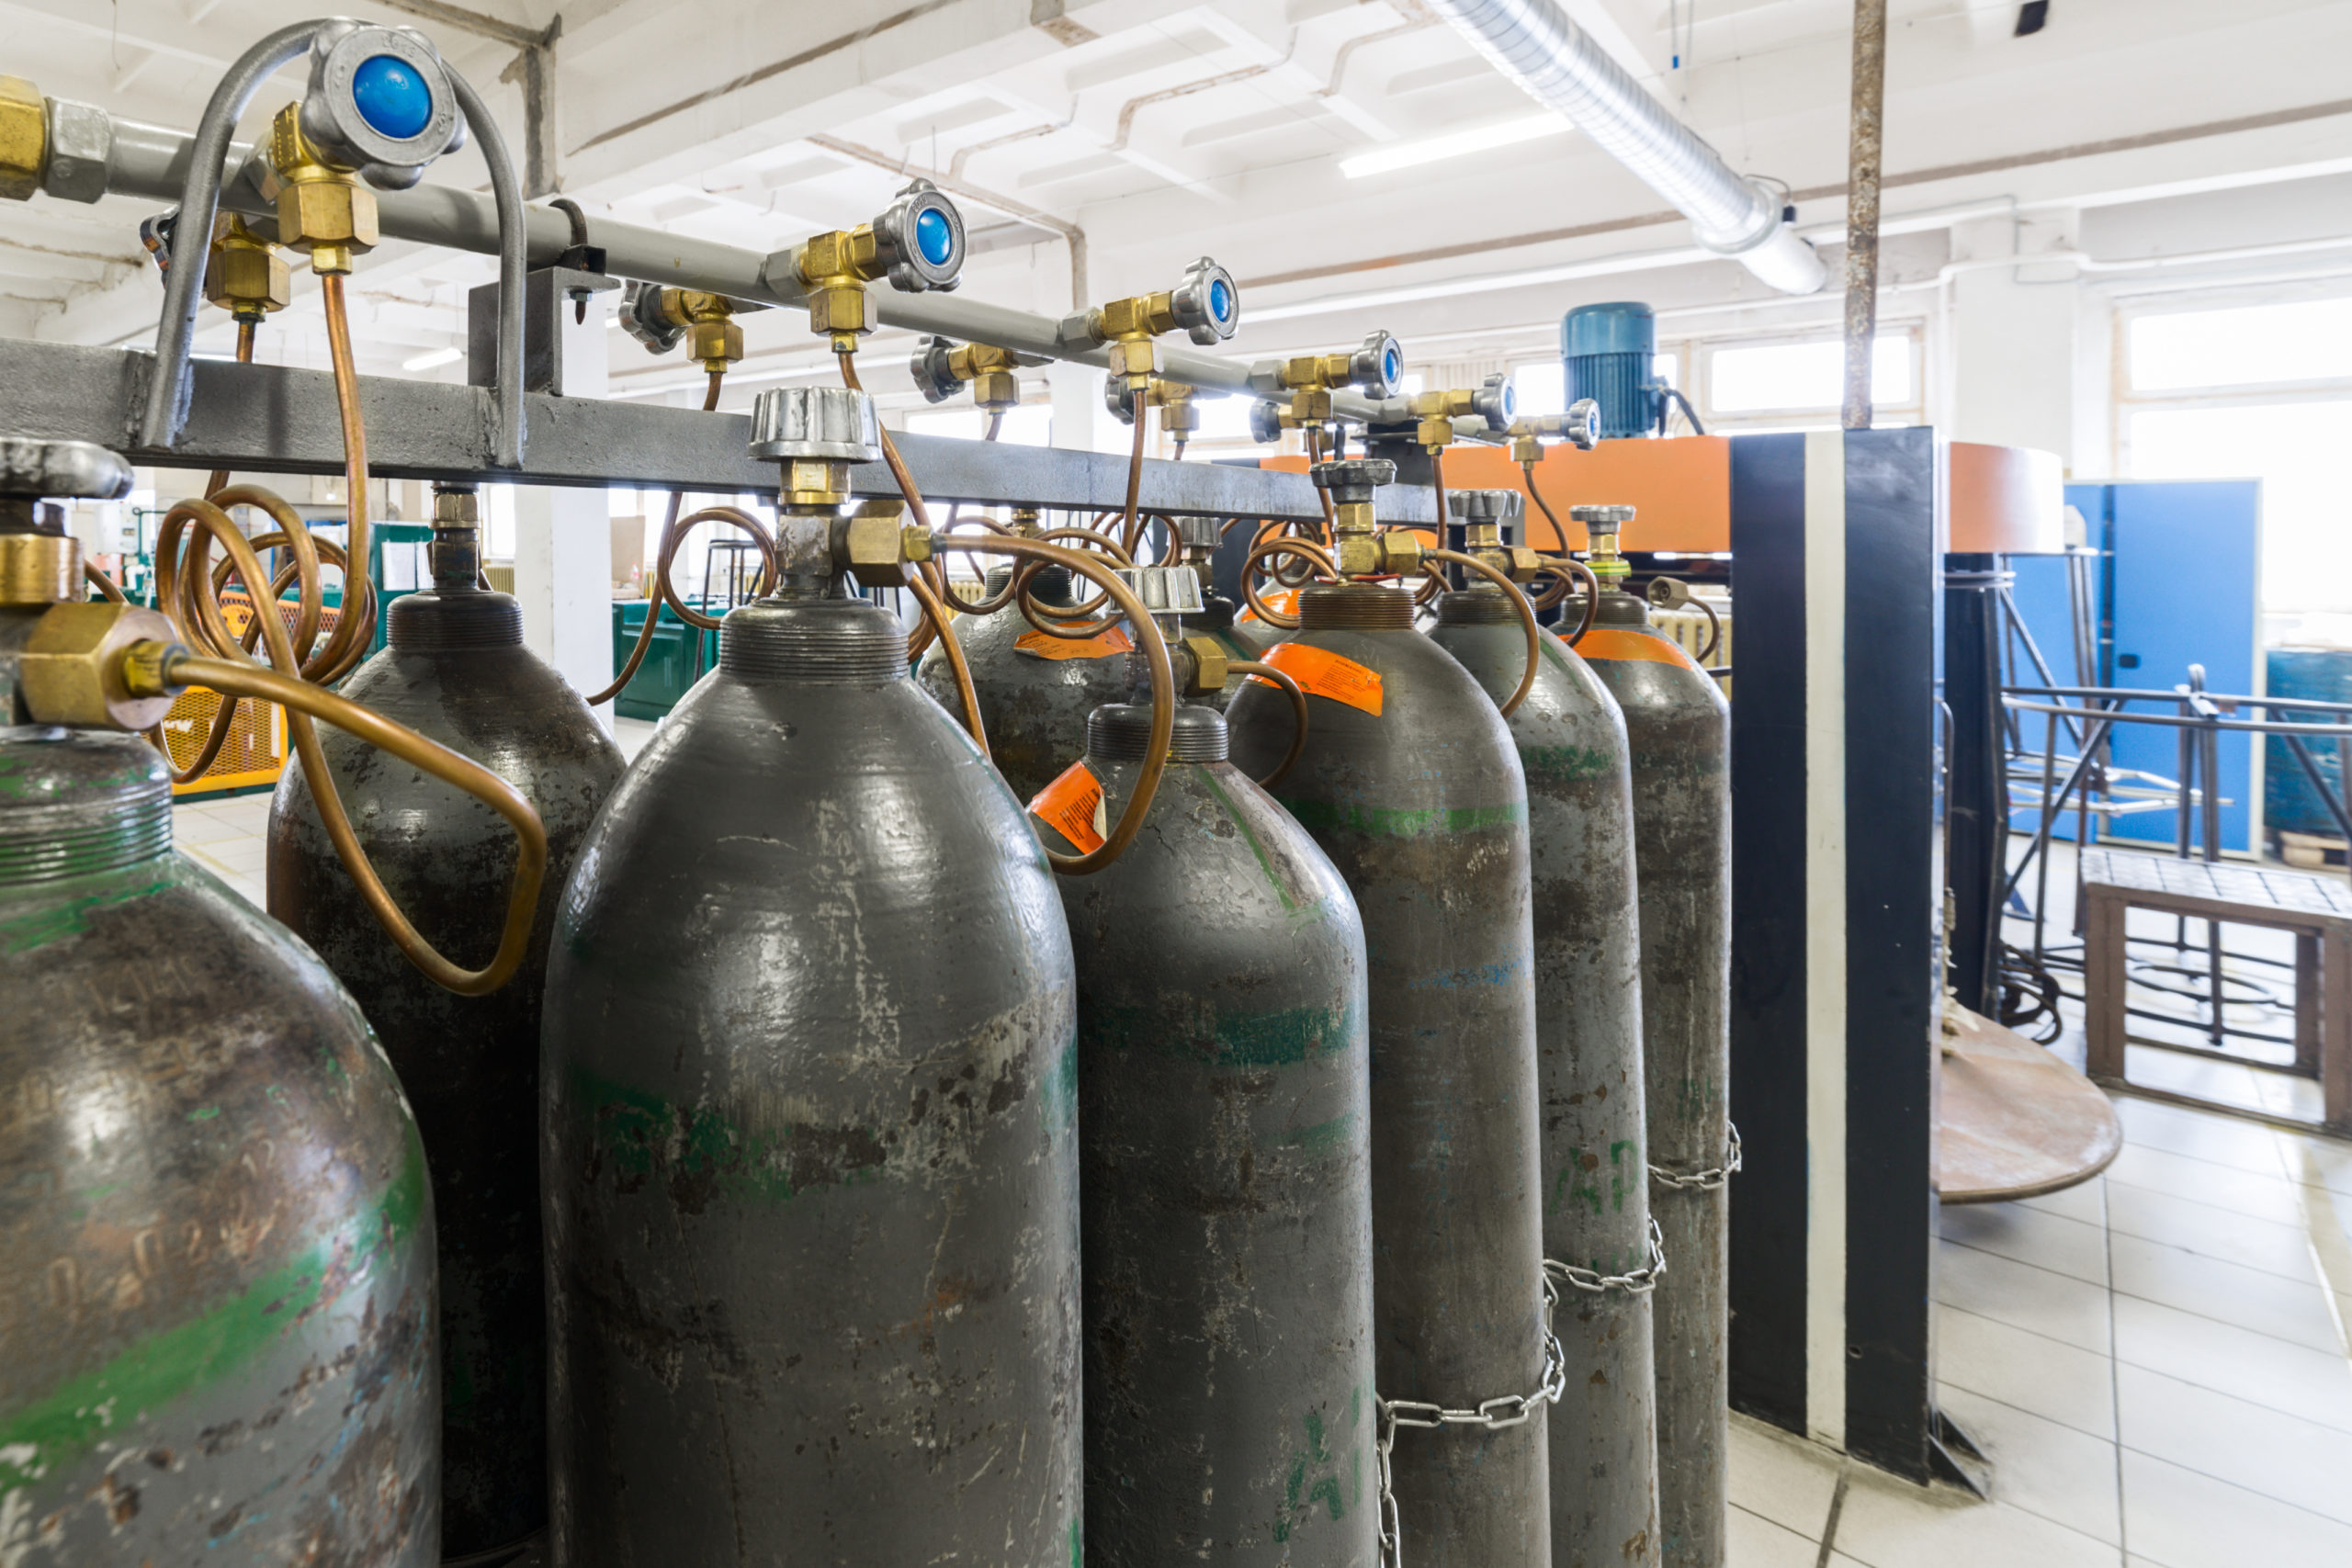 Rows of gray gas cylinders